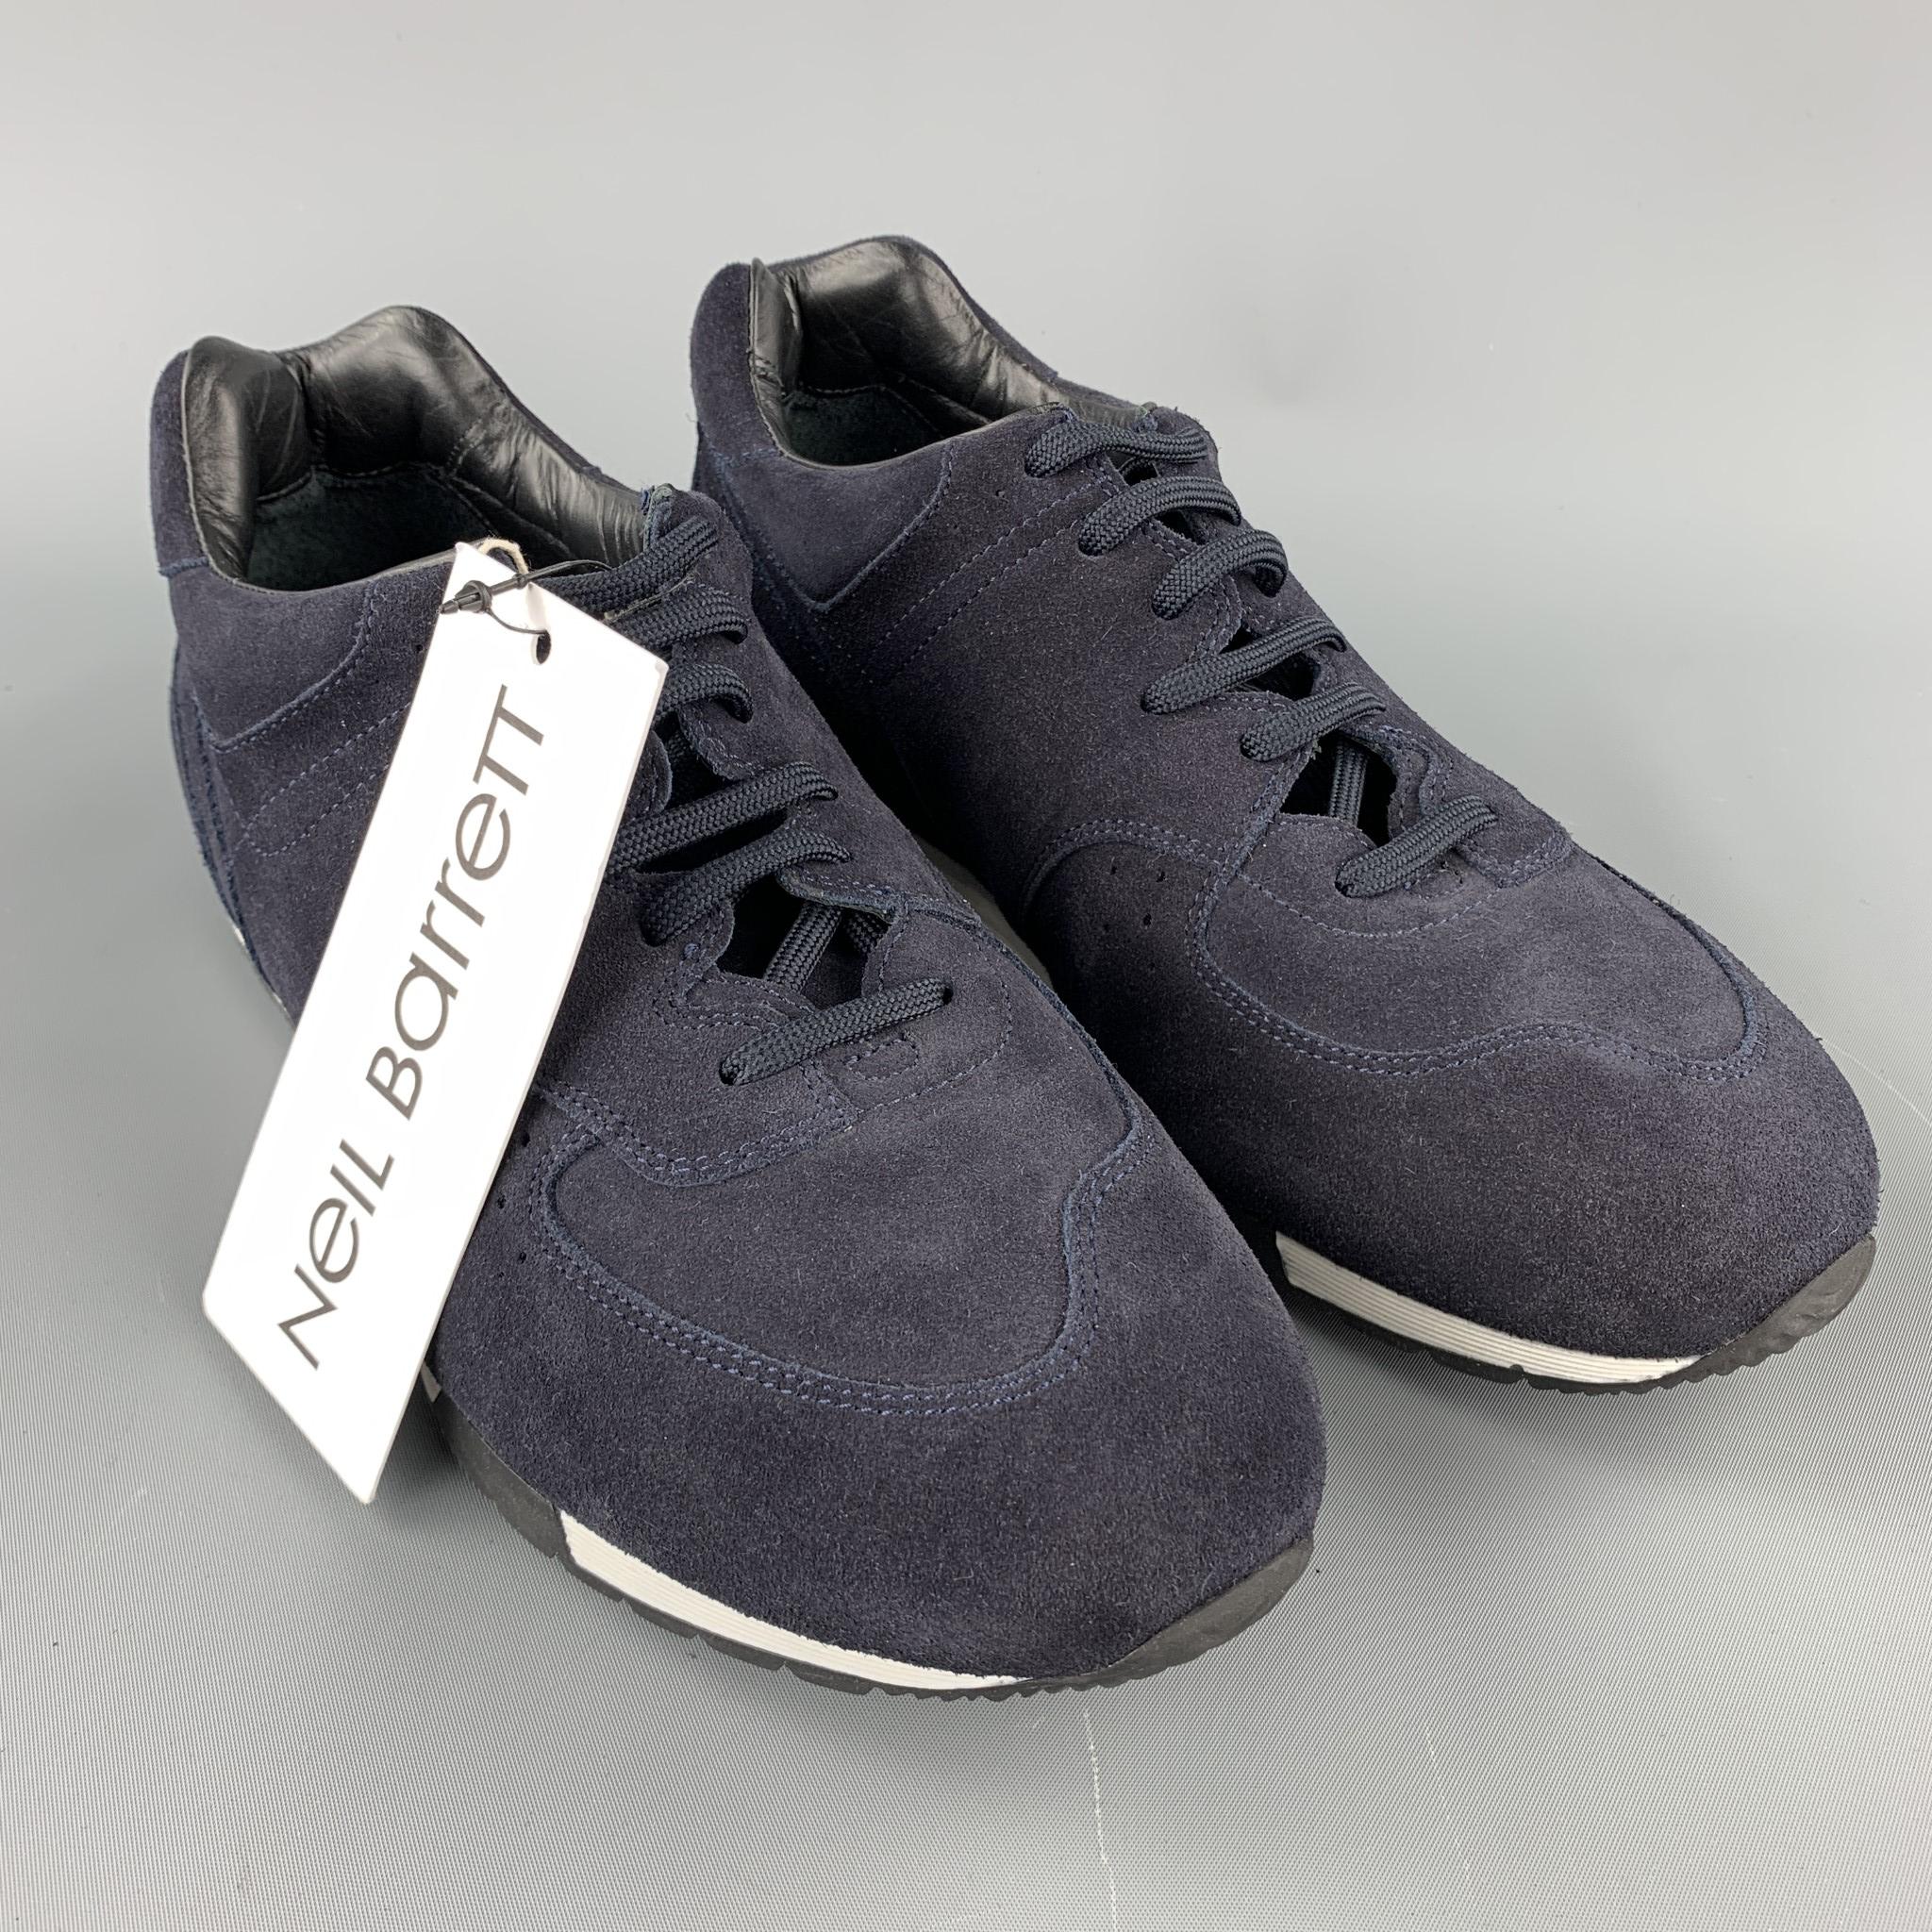 NEIL BARRETT sneakers comes in a navy suede featuring stitching details lace up, and a rubber sole. Made in Italy.

New With Box. 
Marked: IT 43

Outsole:

11.5 in. x 4 in. 